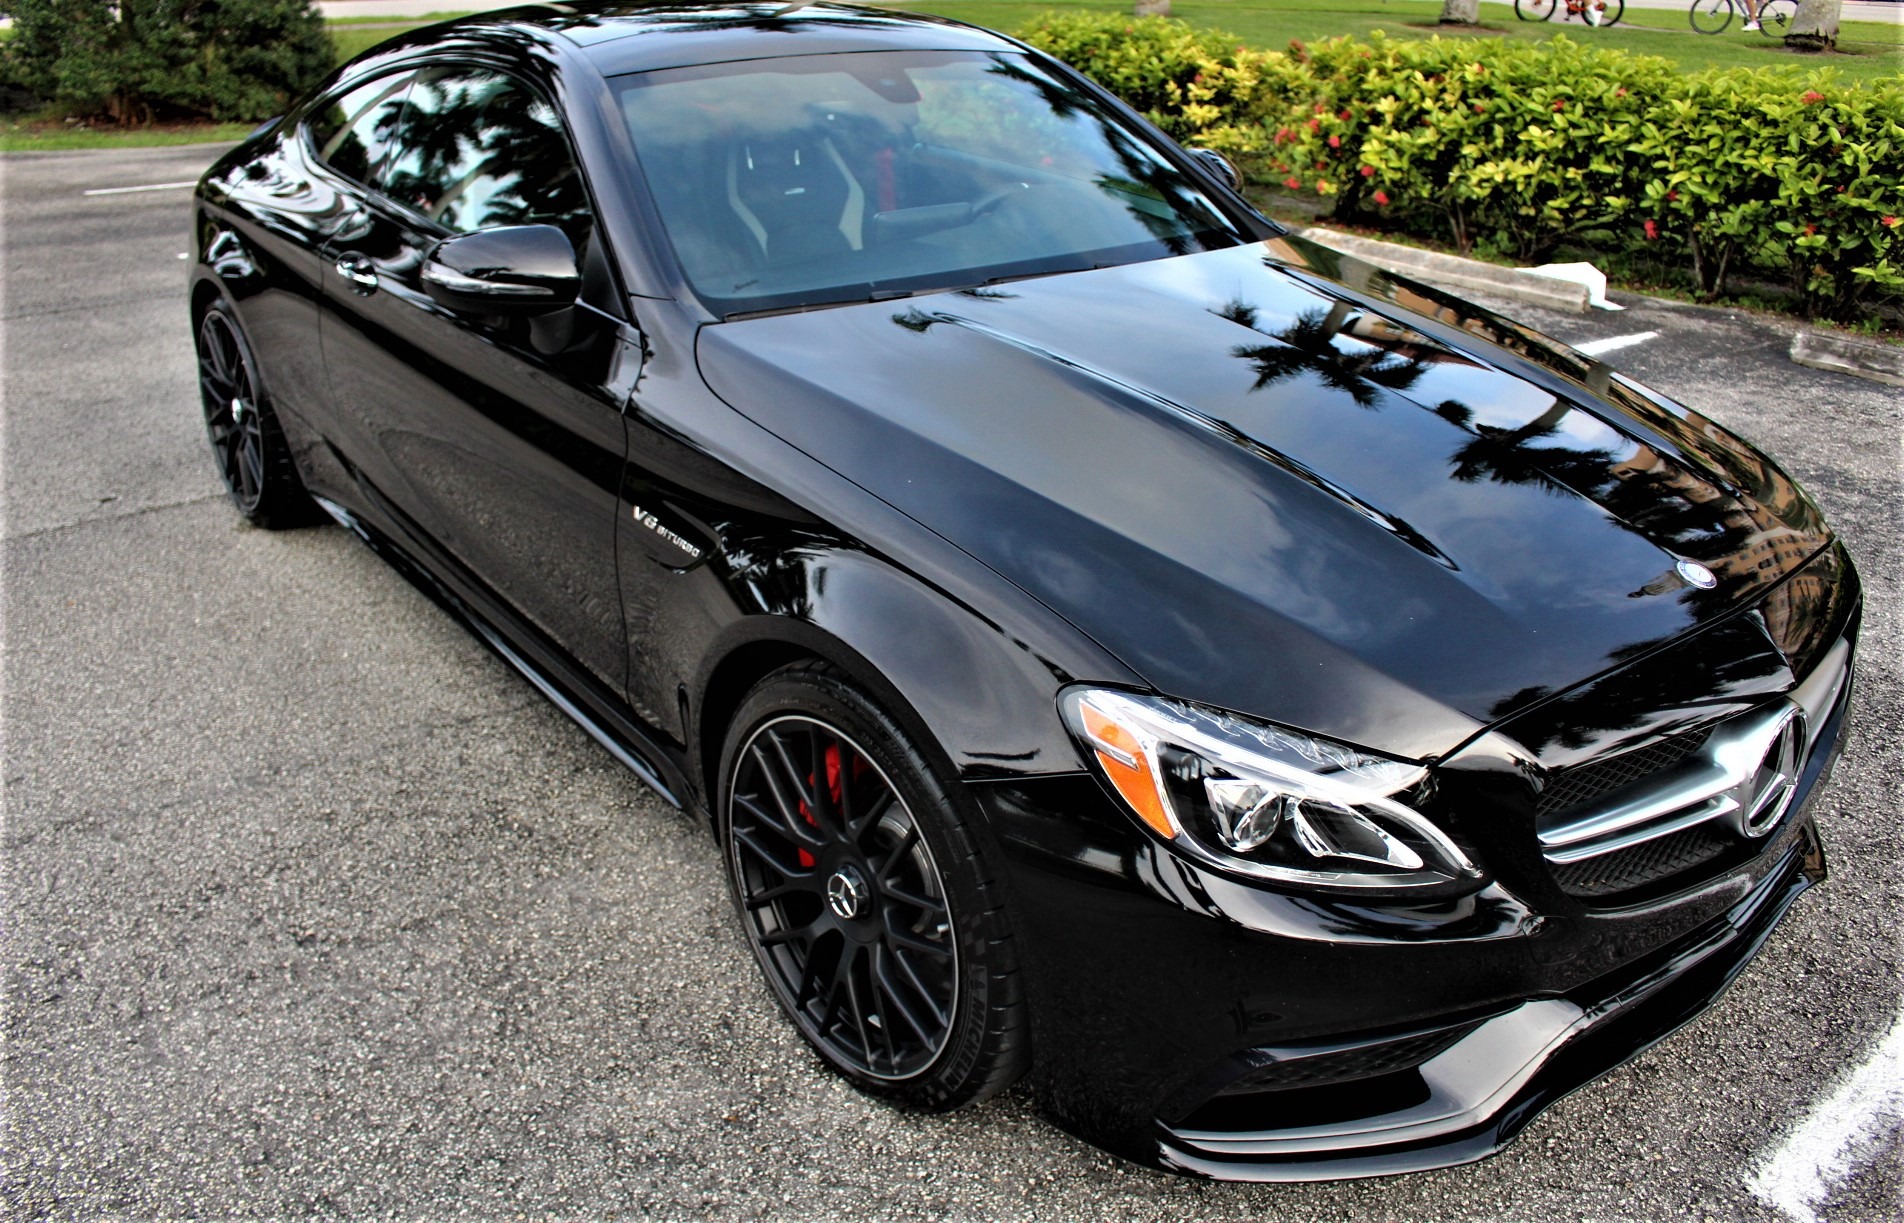 Used 2017 Mercedes-Benz C-Class AMG C 63 S for sale Sold at The Gables Sports Cars in Miami FL 33146 2